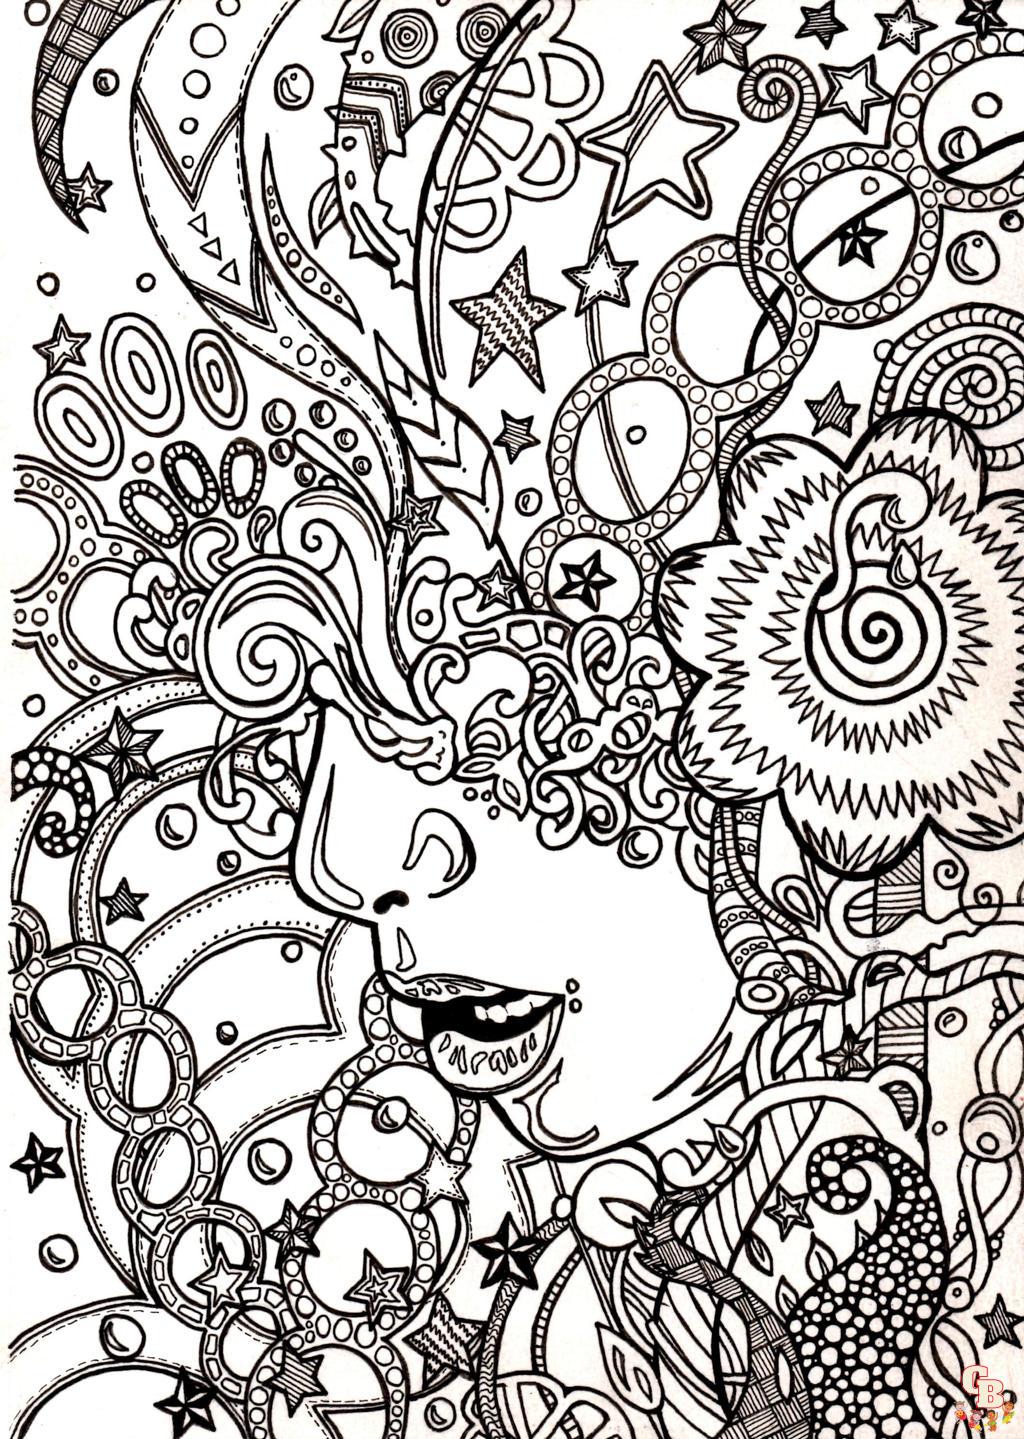 Trippy Coloring Pages Just for Fun